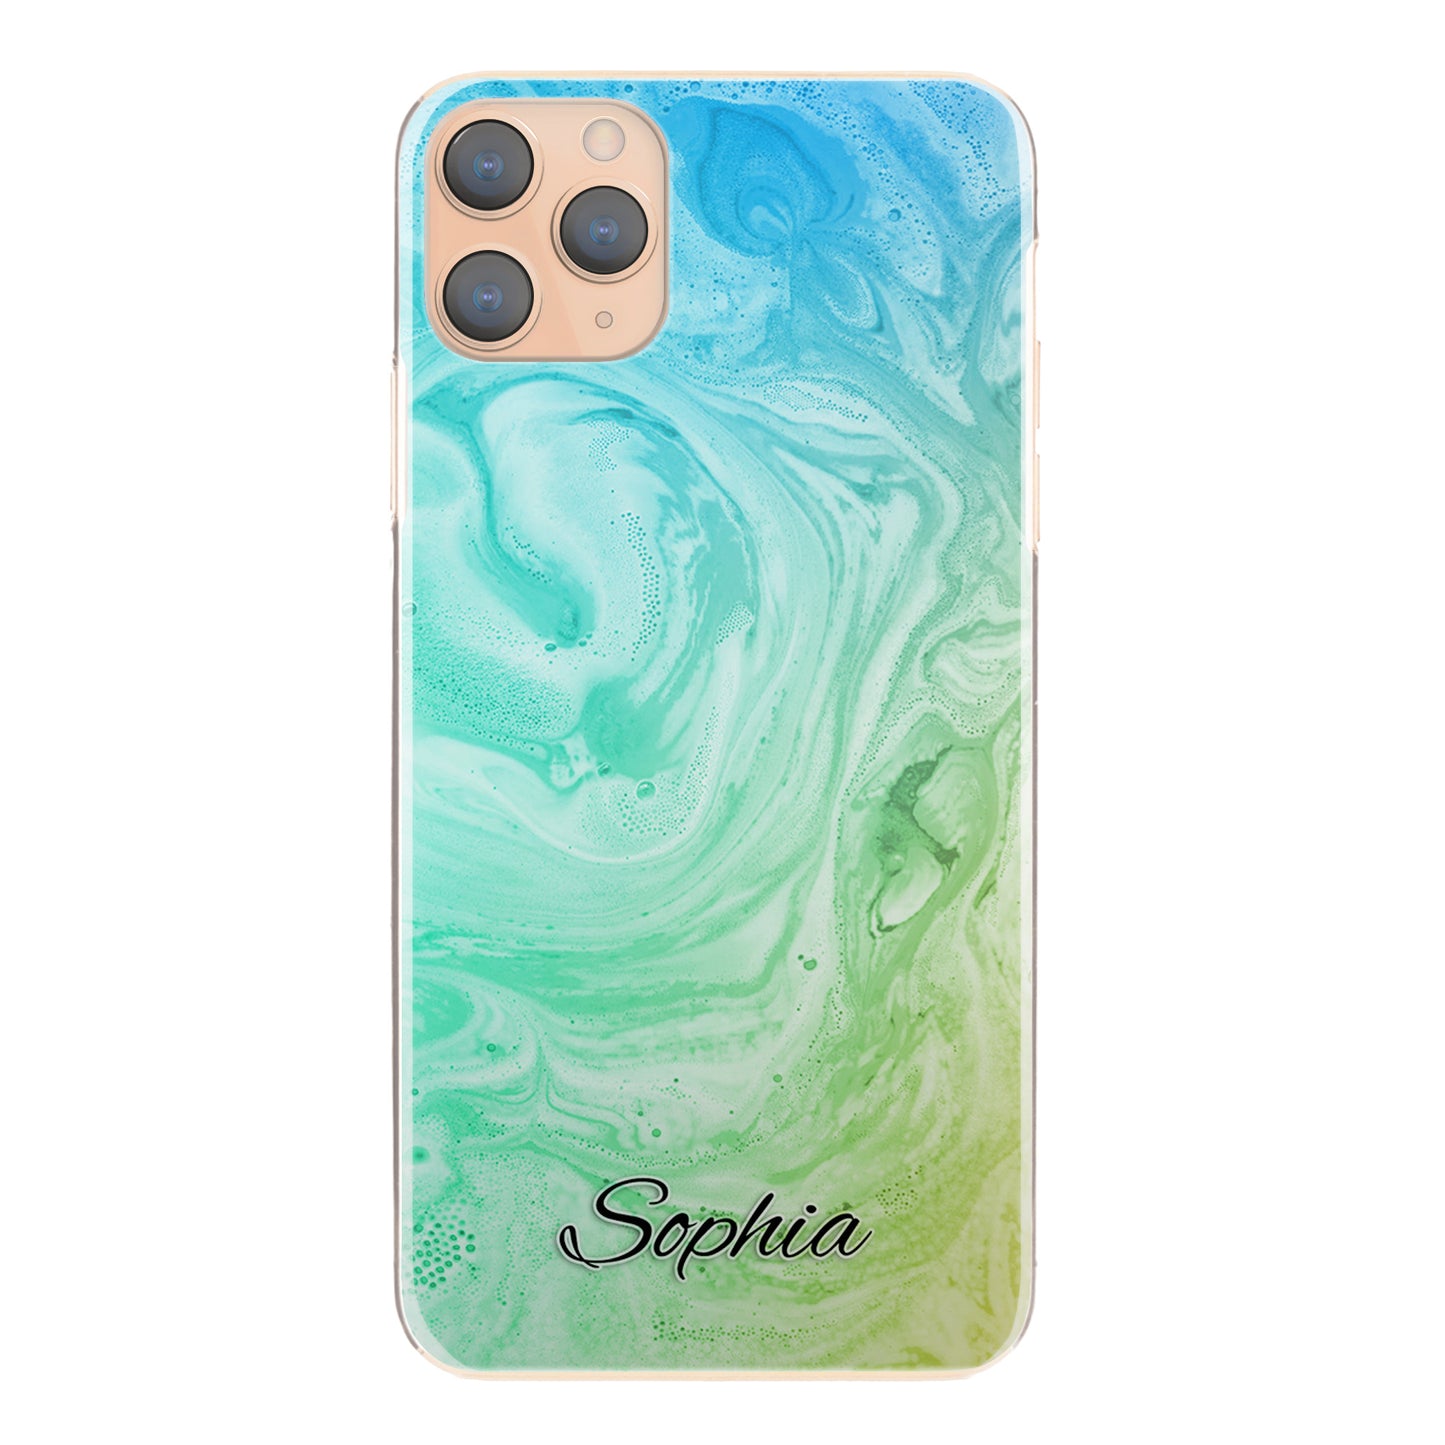 Personalised Honor Phone Hard Case with Stylish Text on Turquoise Gradient Swirled Marble